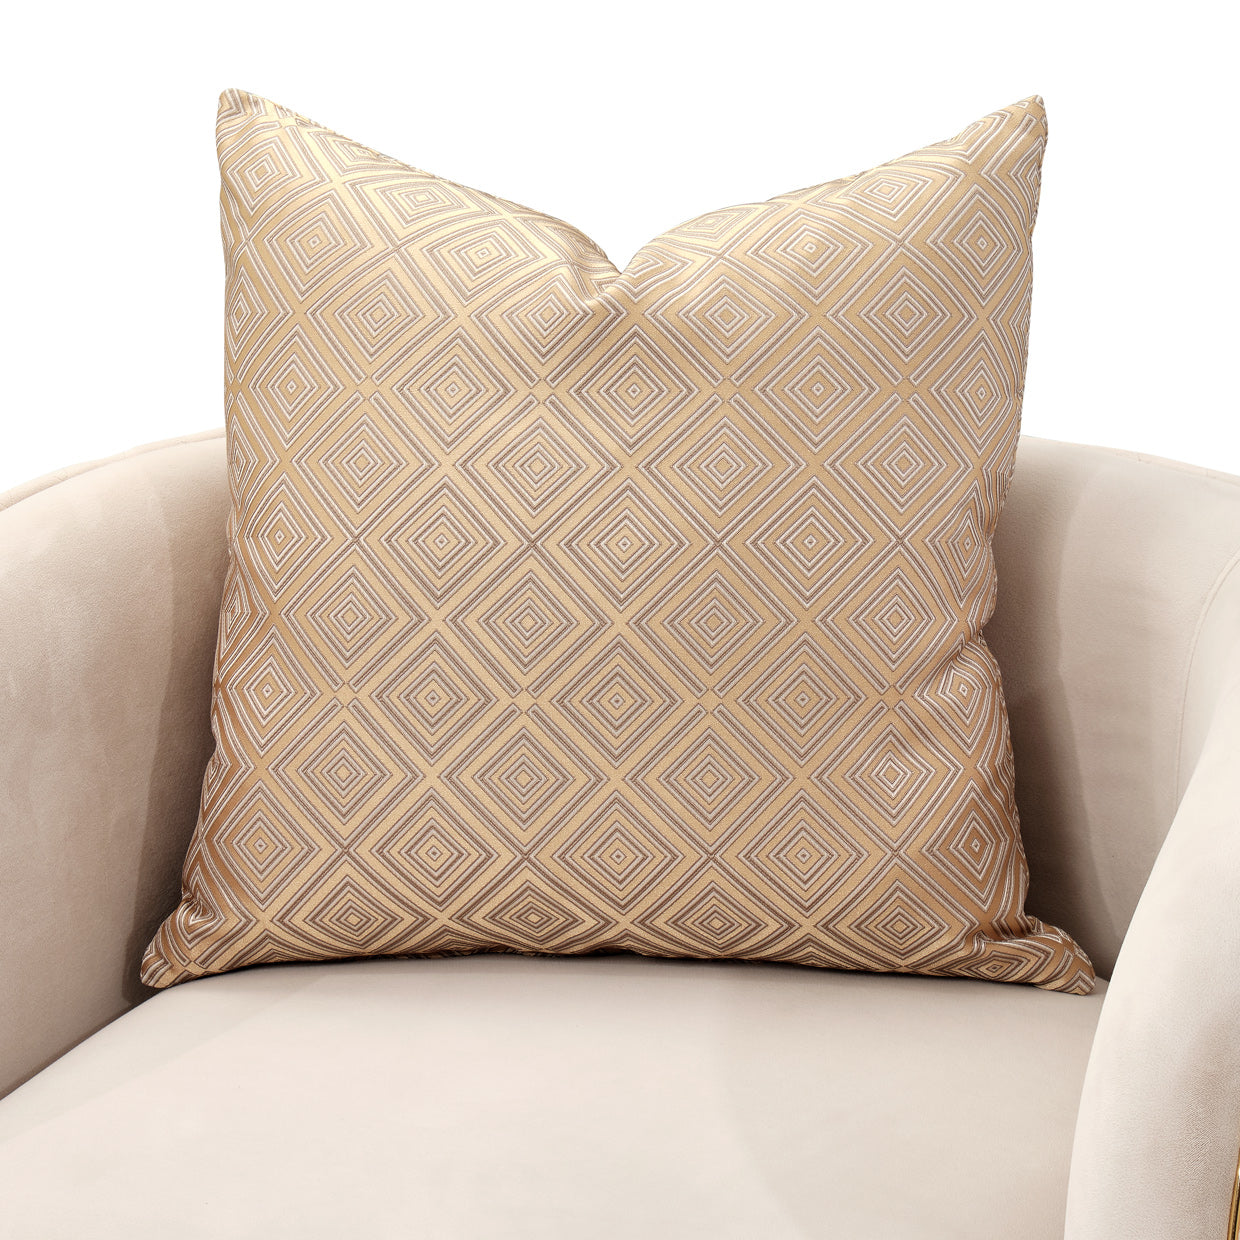 Ariana, loveseat, Intimate luxury, Exquisite accent pillows, Gold jacquard, Velvety beige, plushness, Oblong centerpiece, Personal seating experience, Quiet evenings, Heartfelt, conversations, dream art, michael amini, pillow